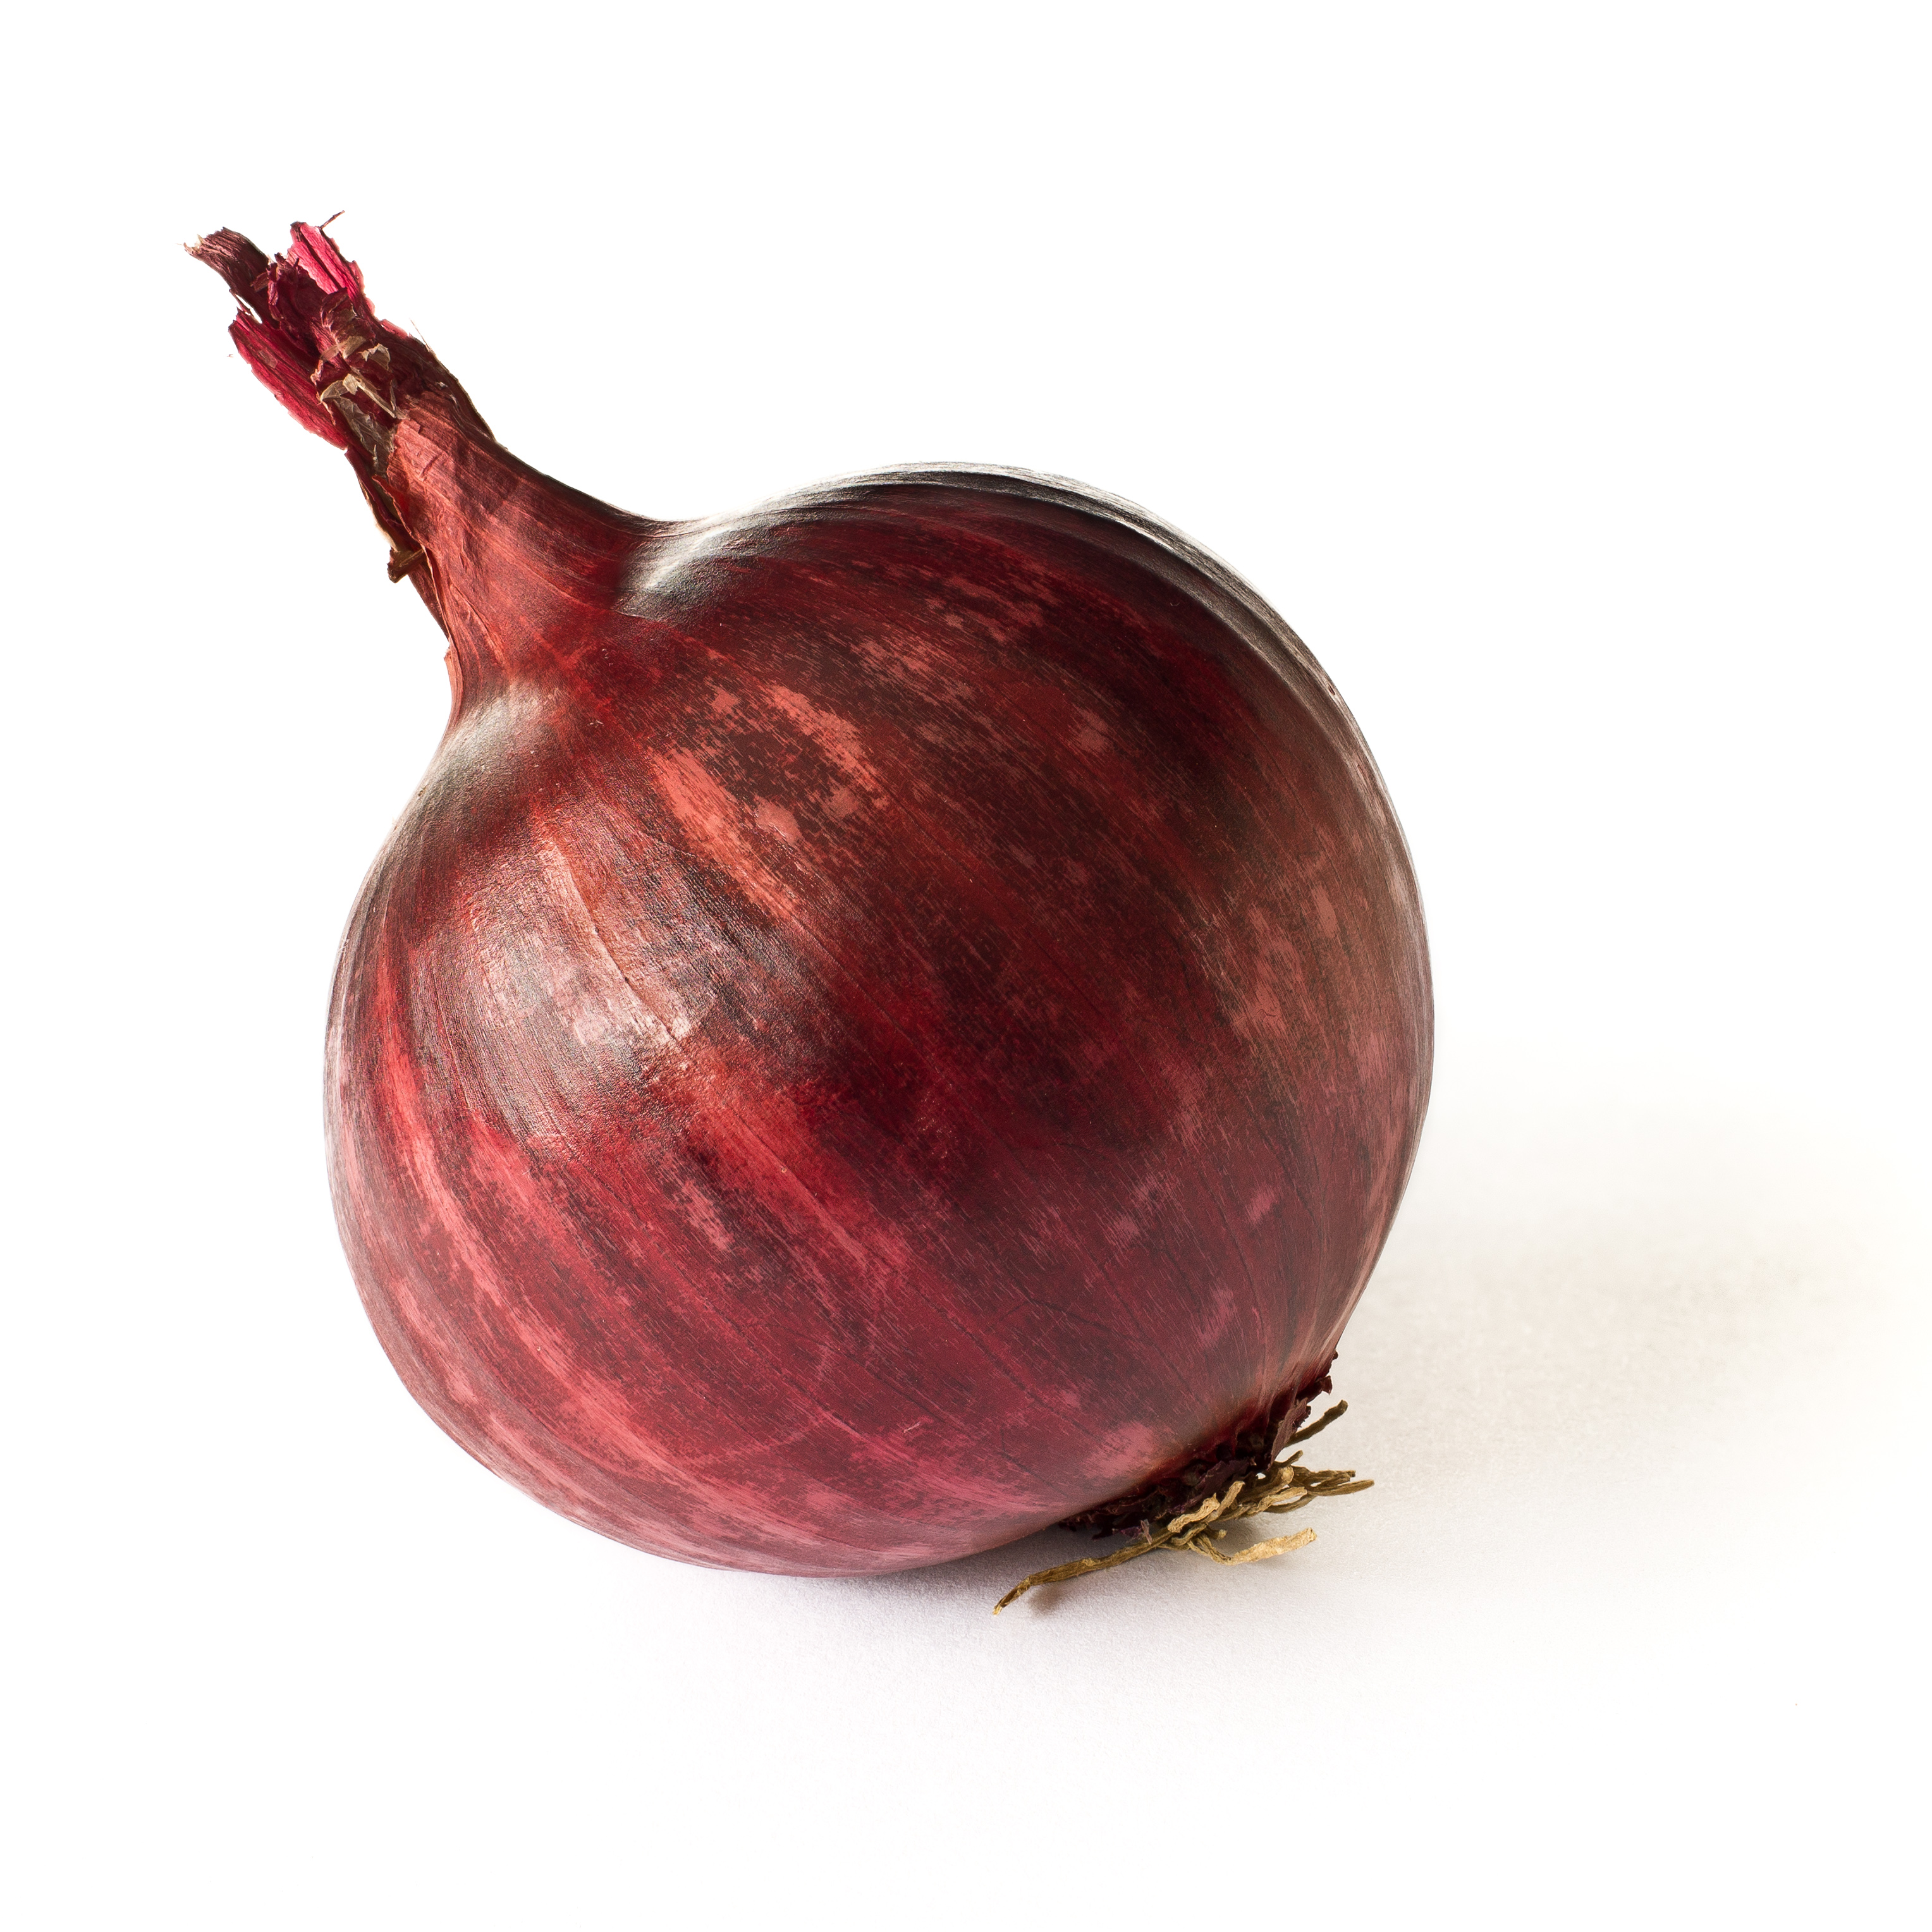 Images of Onion | 3056x3056